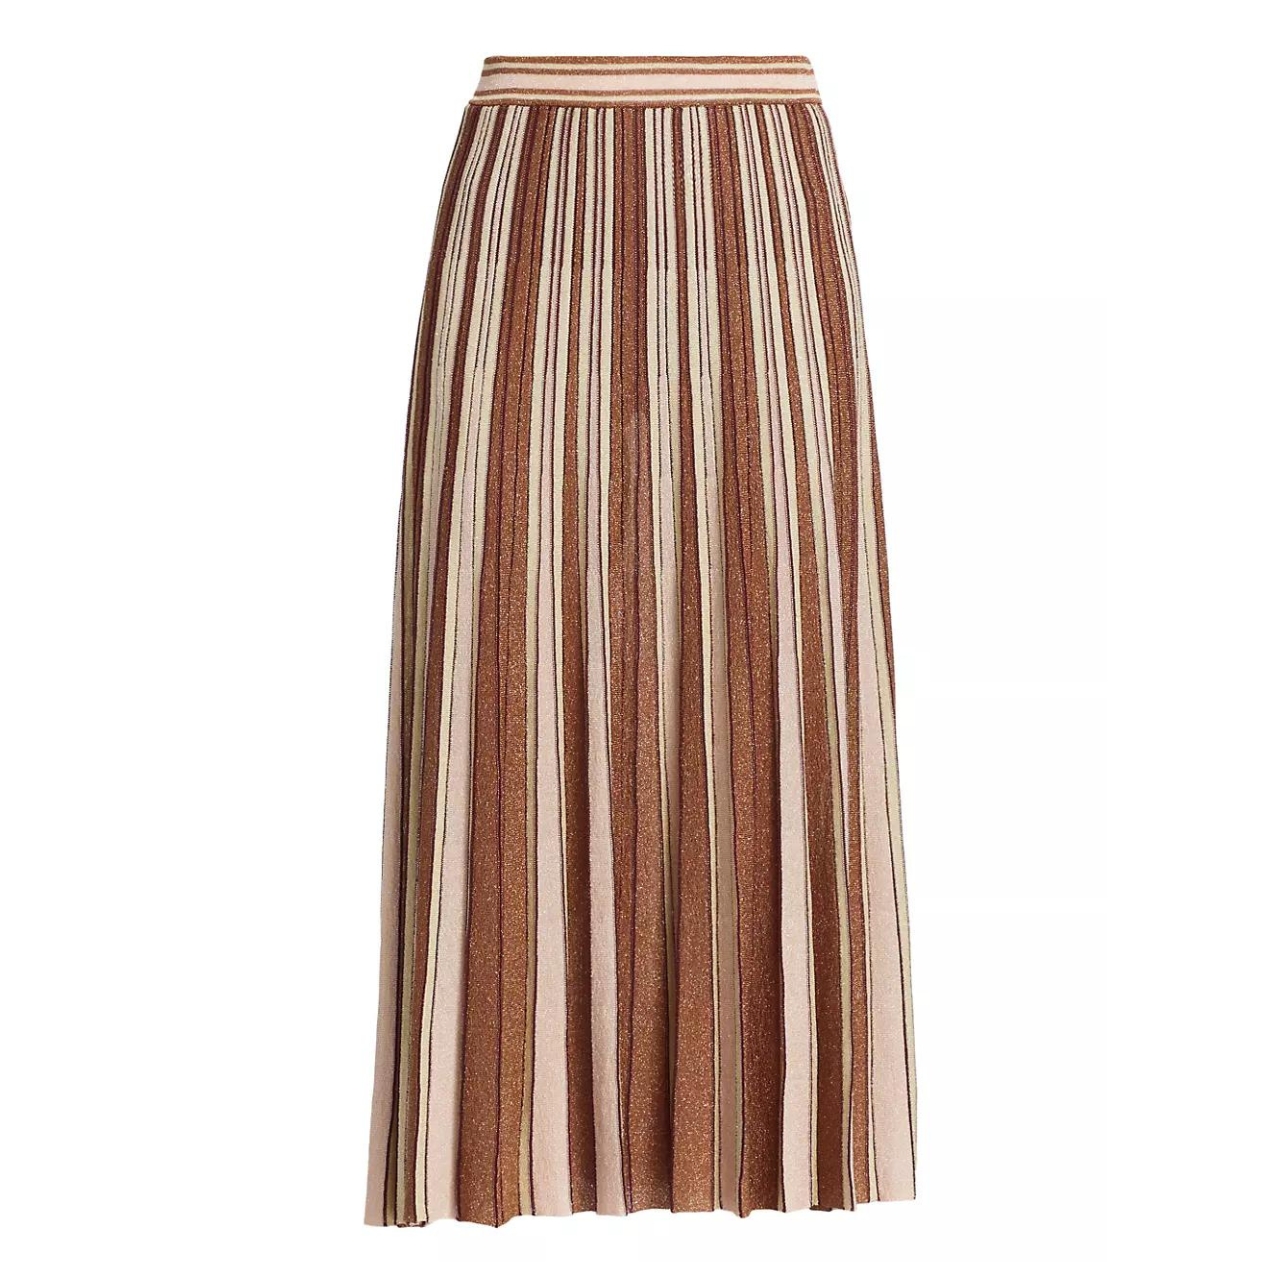 You can get away with just a carry-on when you fill it with pieces like Zimmermann’s Luminosity lurex stripe skirt. Wear it on the beach with sandals during the day, and dress it up with heels at night—it’s going anywhere you are.